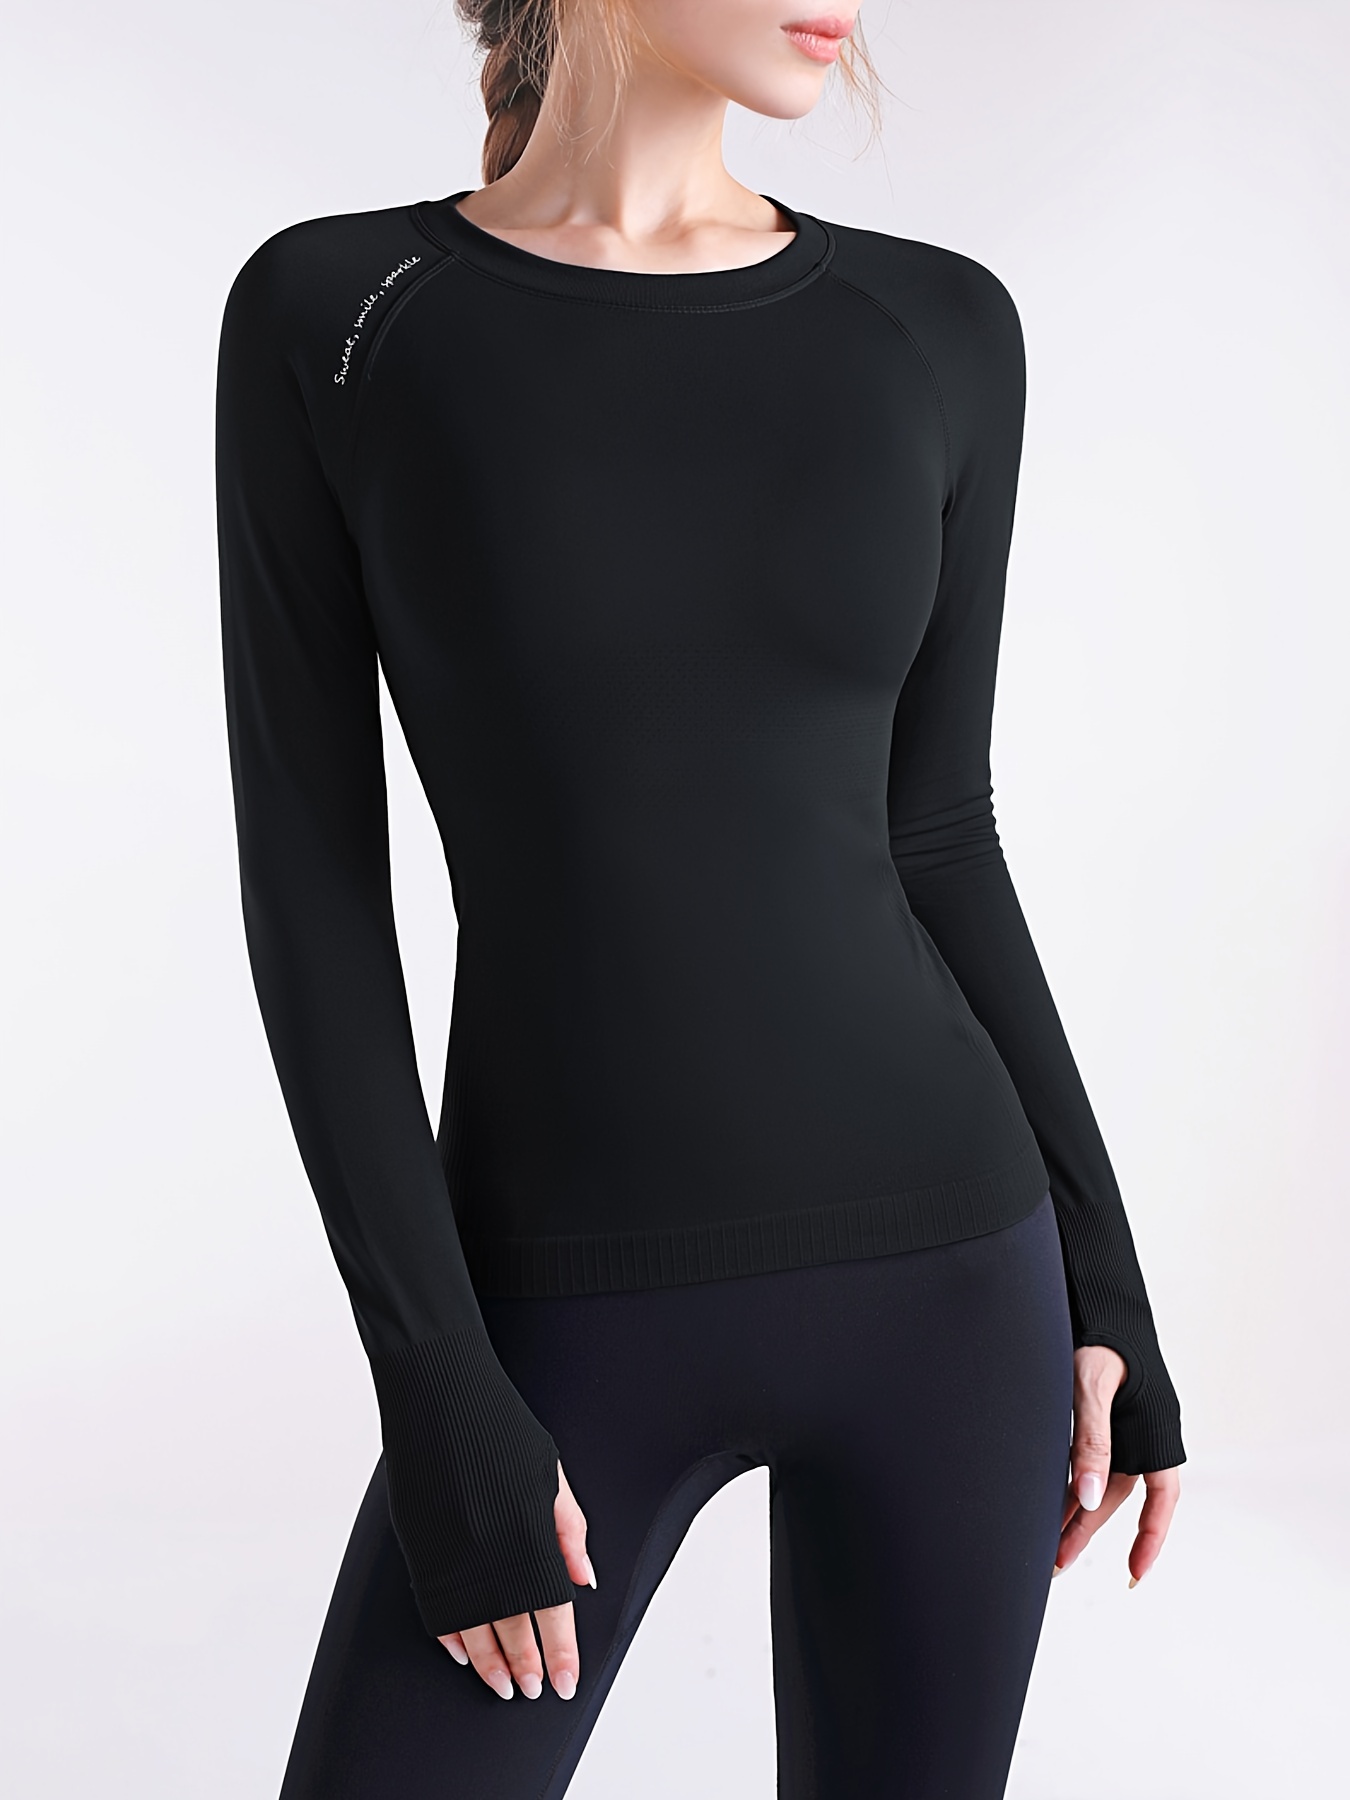 Simple Yoga Clothes Women's Tight Gym Clothes Sports Long Sleeves